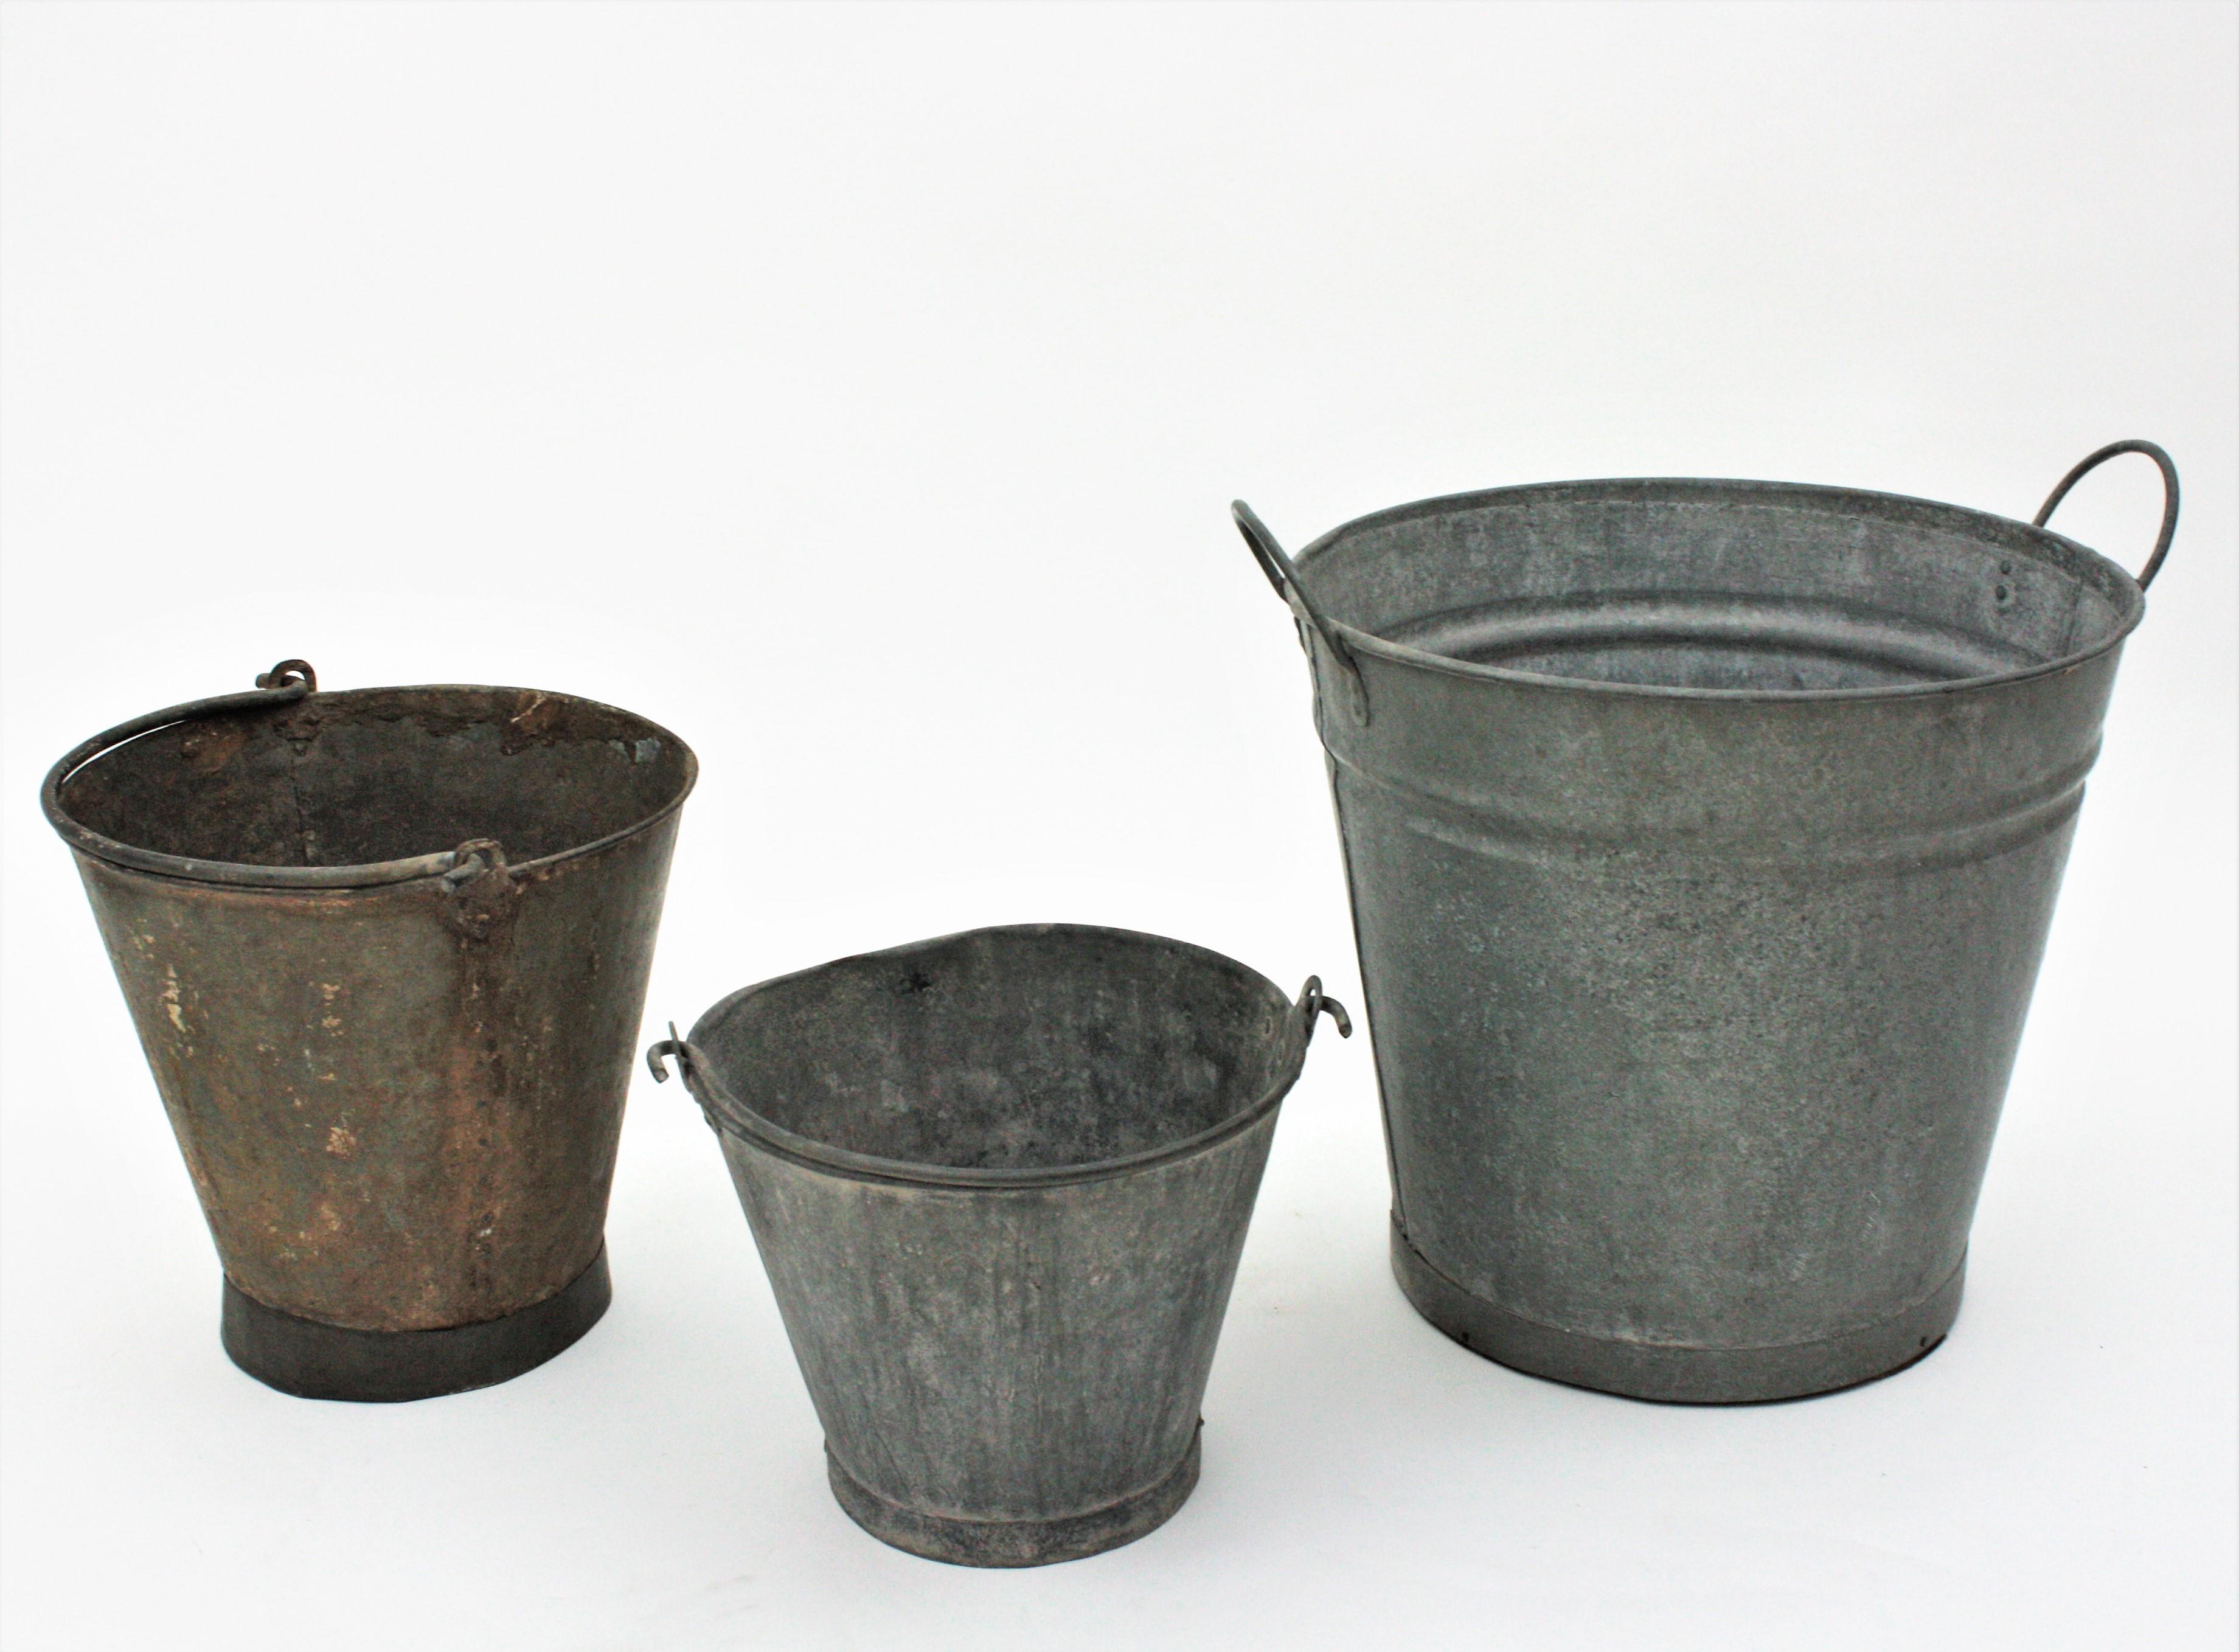 Set of Three old zinc buckets. Spain, 1940s.
For storage, gardening and decorative purposes at home or for window dressings.
The large one has two handles and the other ones have a folding single handle.
Measures ( including handles)
Large: 47